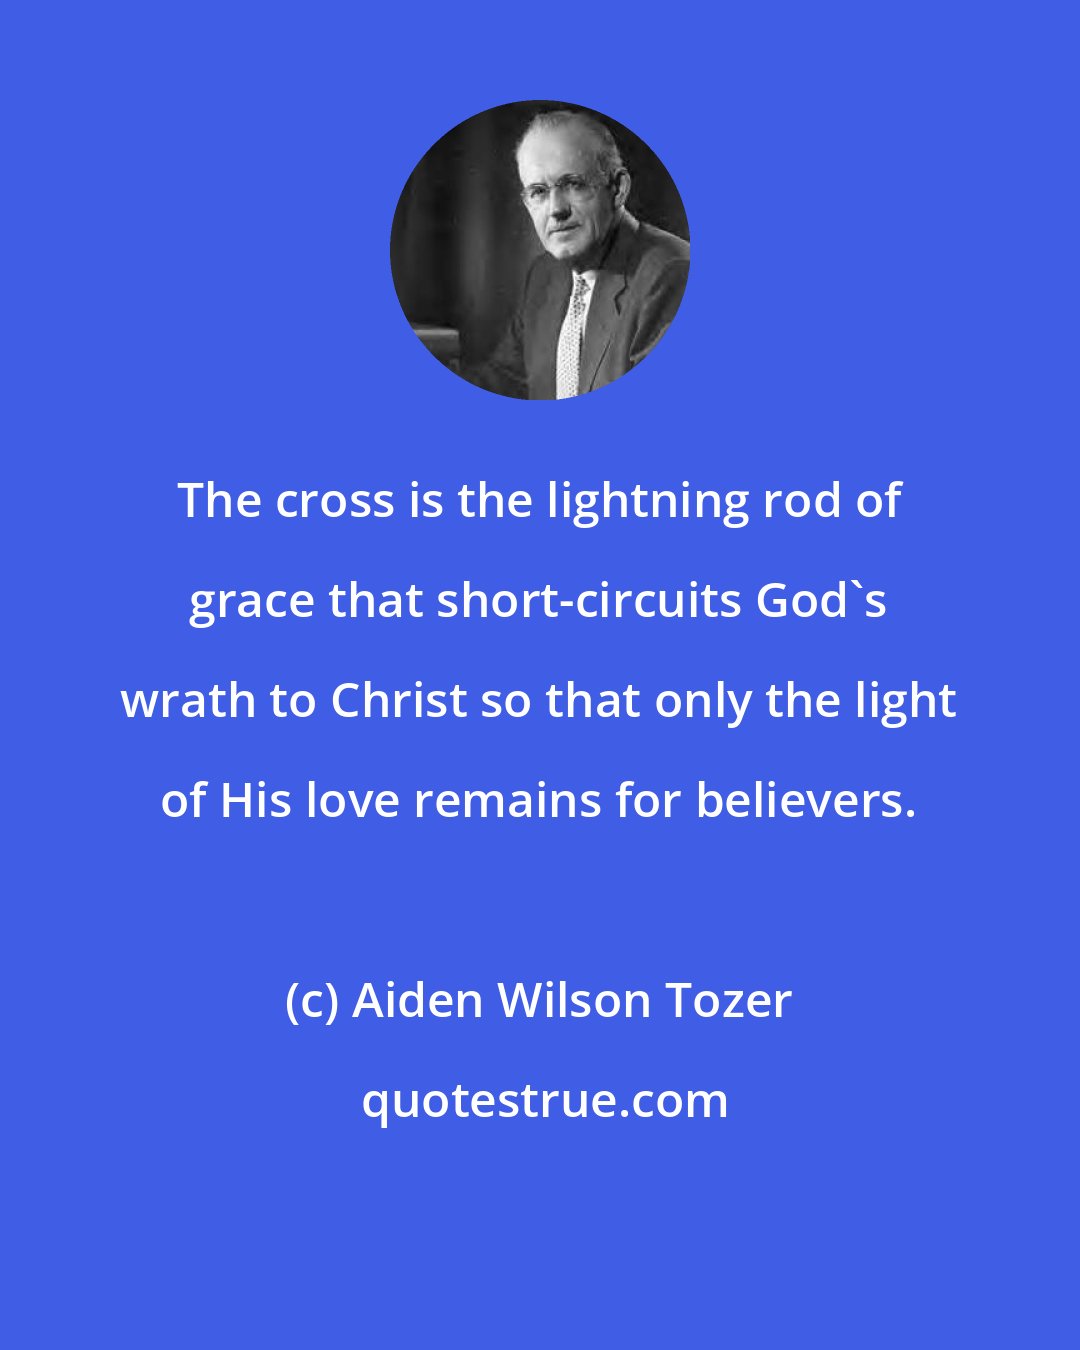 Aiden Wilson Tozer: The cross is the lightning rod of grace that short-circuits God's wrath to Christ so that only the light of His love remains for believers.